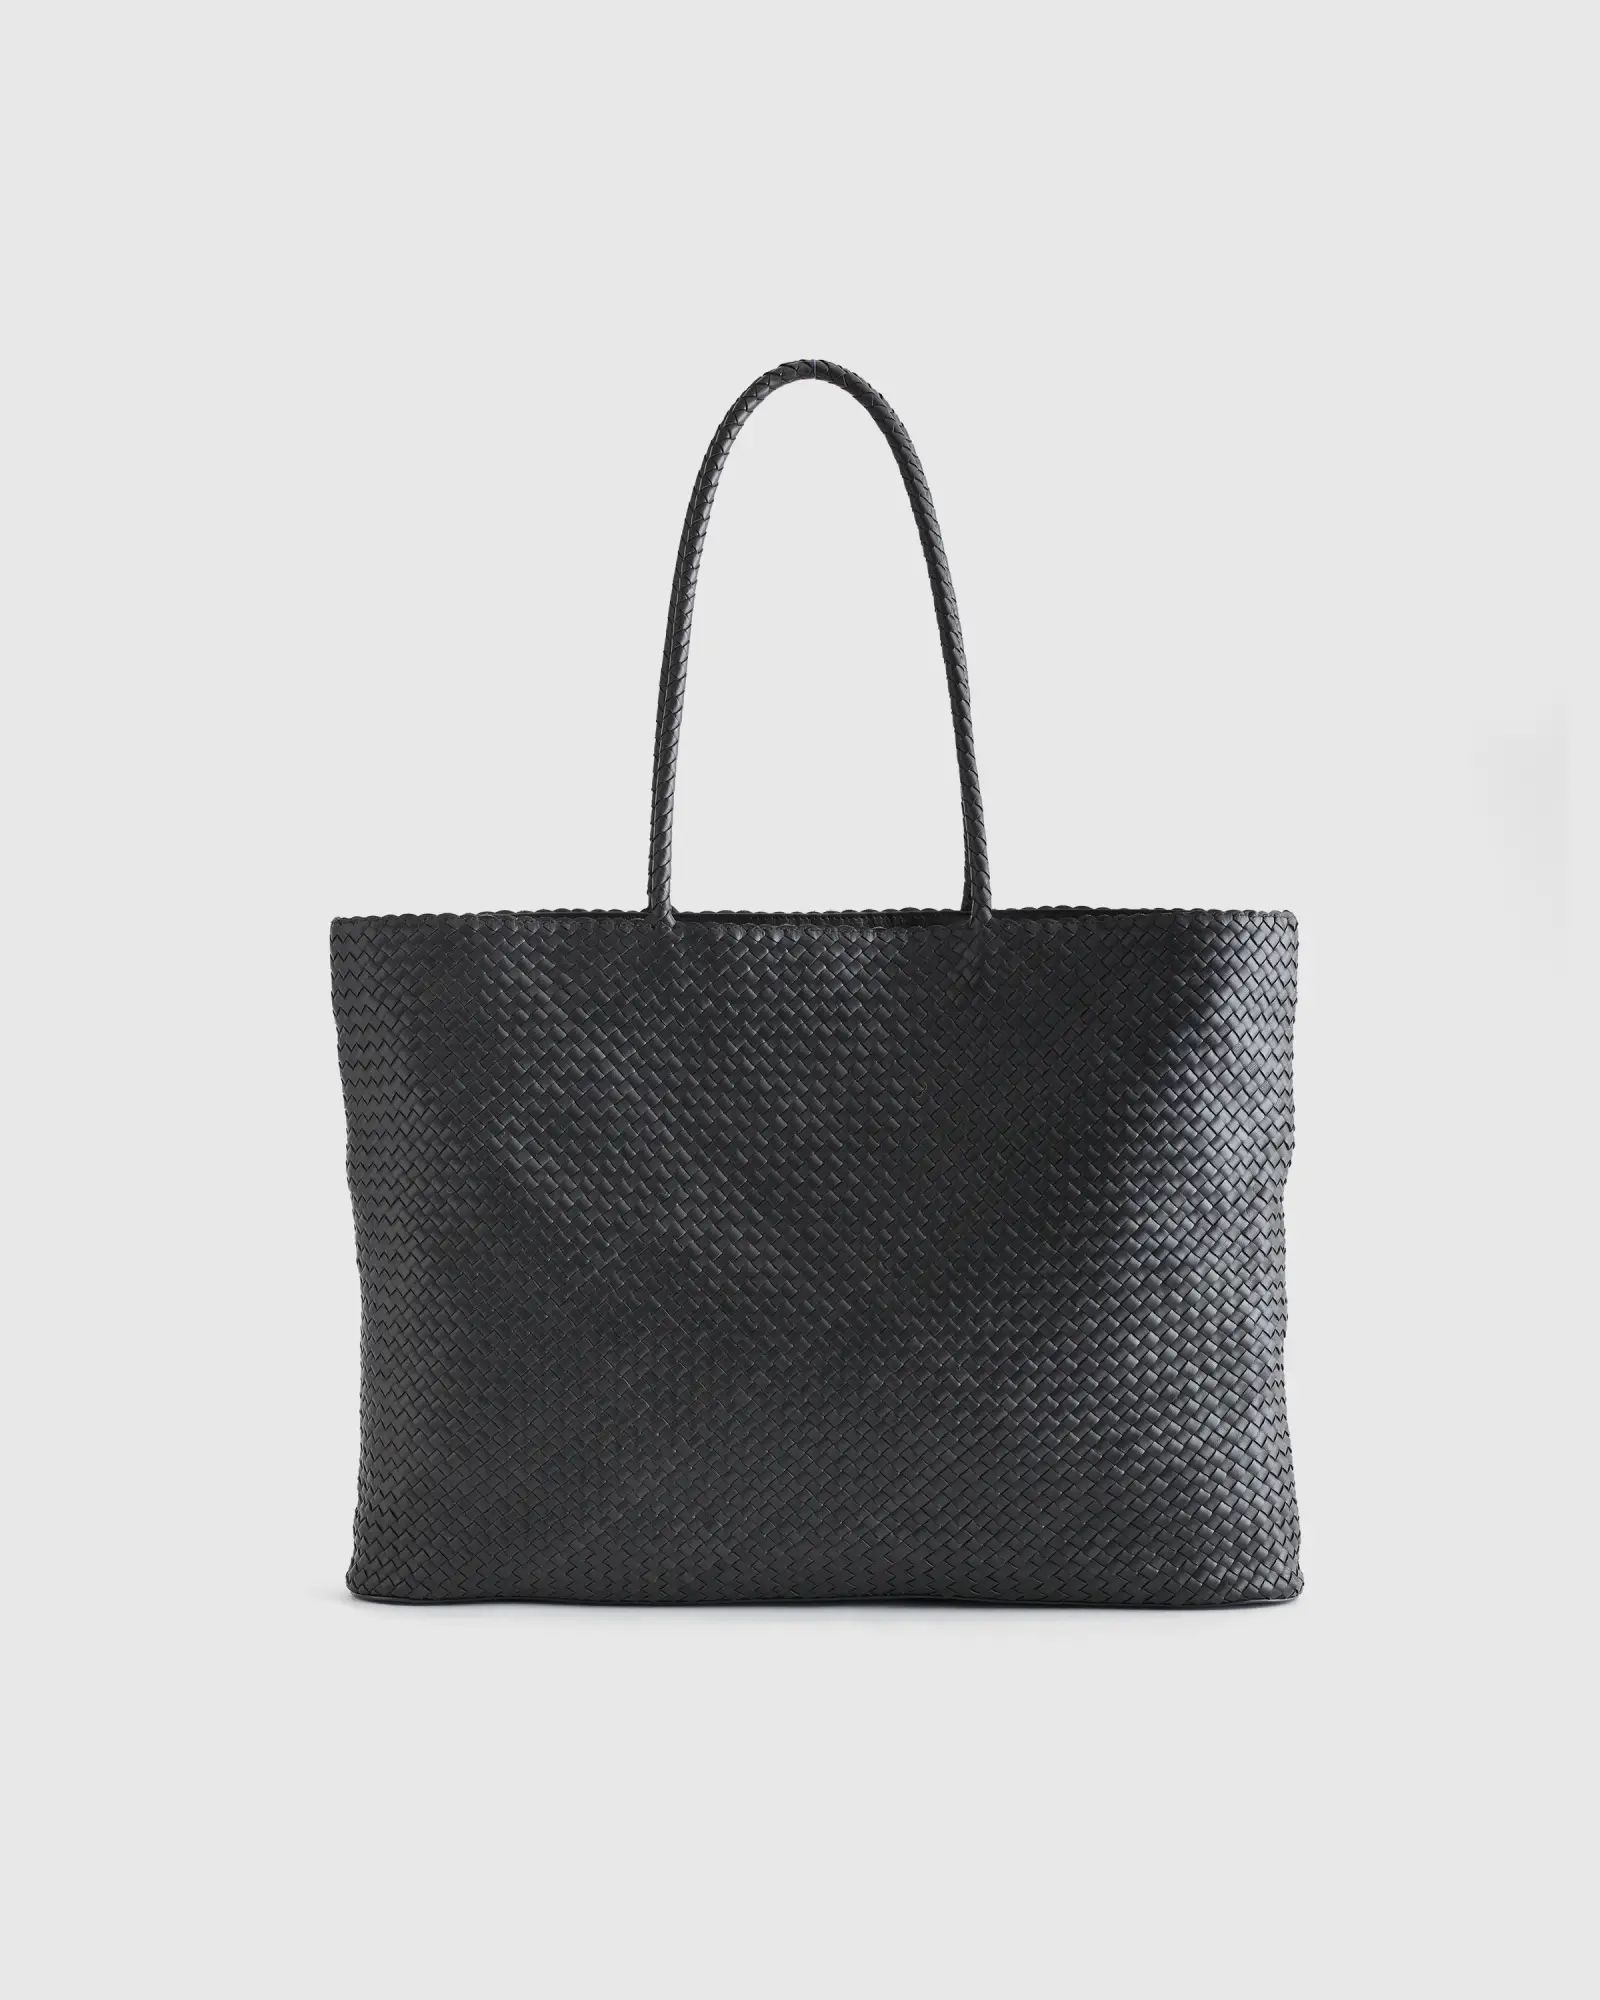 Italian Leather Handwoven Tote | Quince